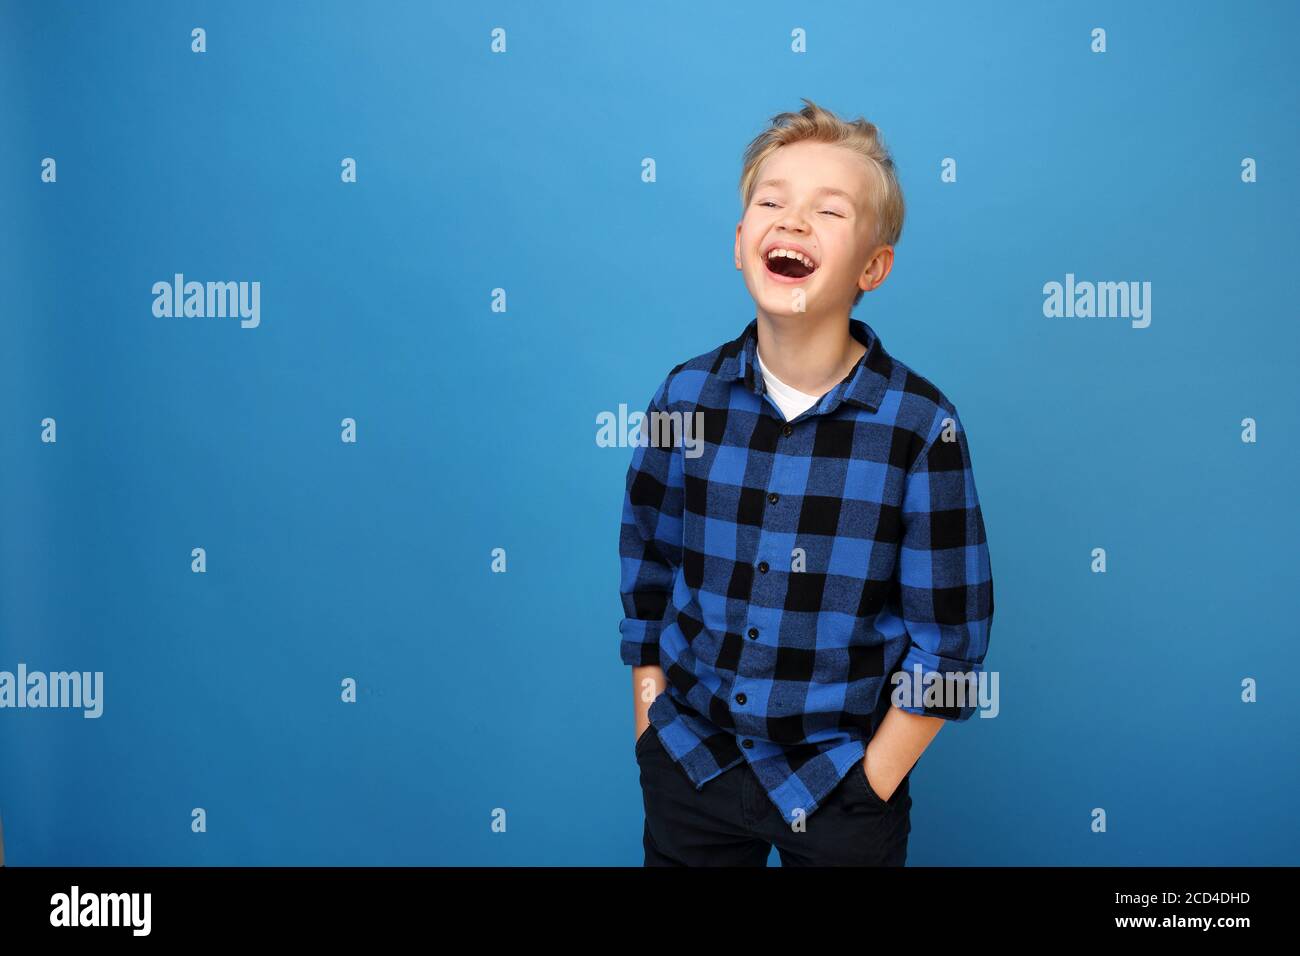 Smiling boy, happy child. Happy child, laughing boy. Happy, smiling boy on a blue background expresses emotions through gestures. Stock Photo